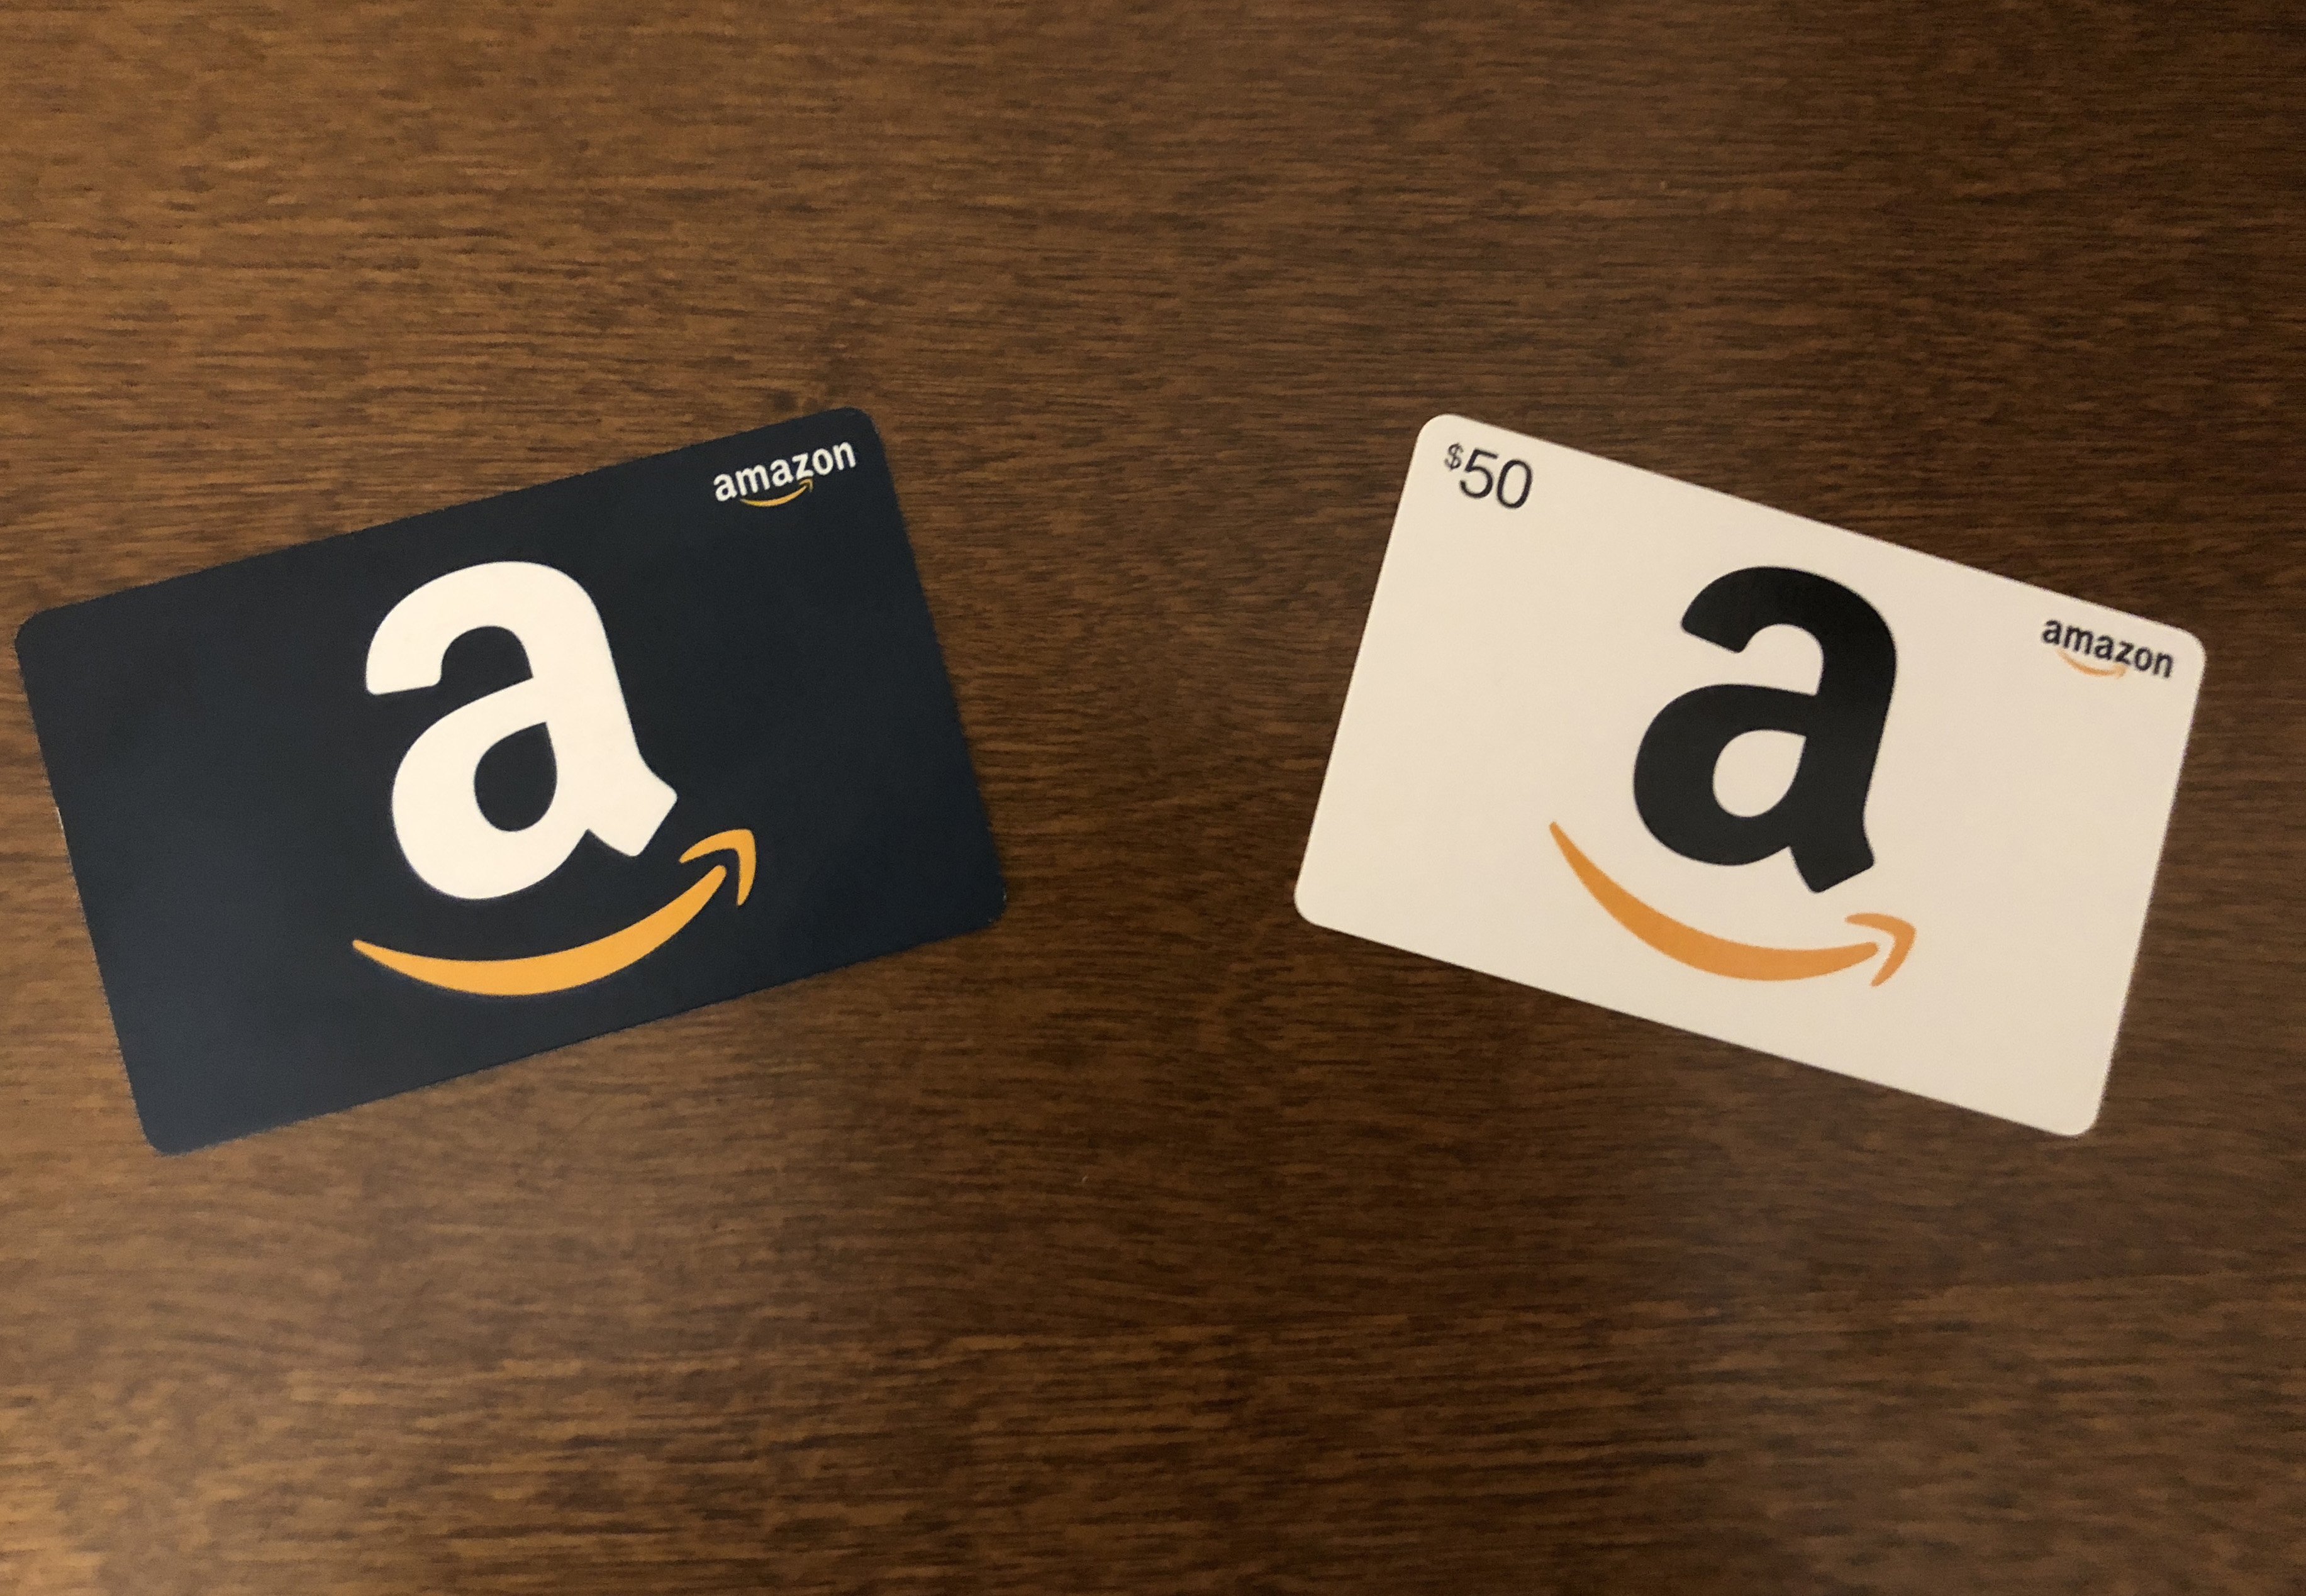 How To Sell Amazon Gift Card For Zelle Instantly